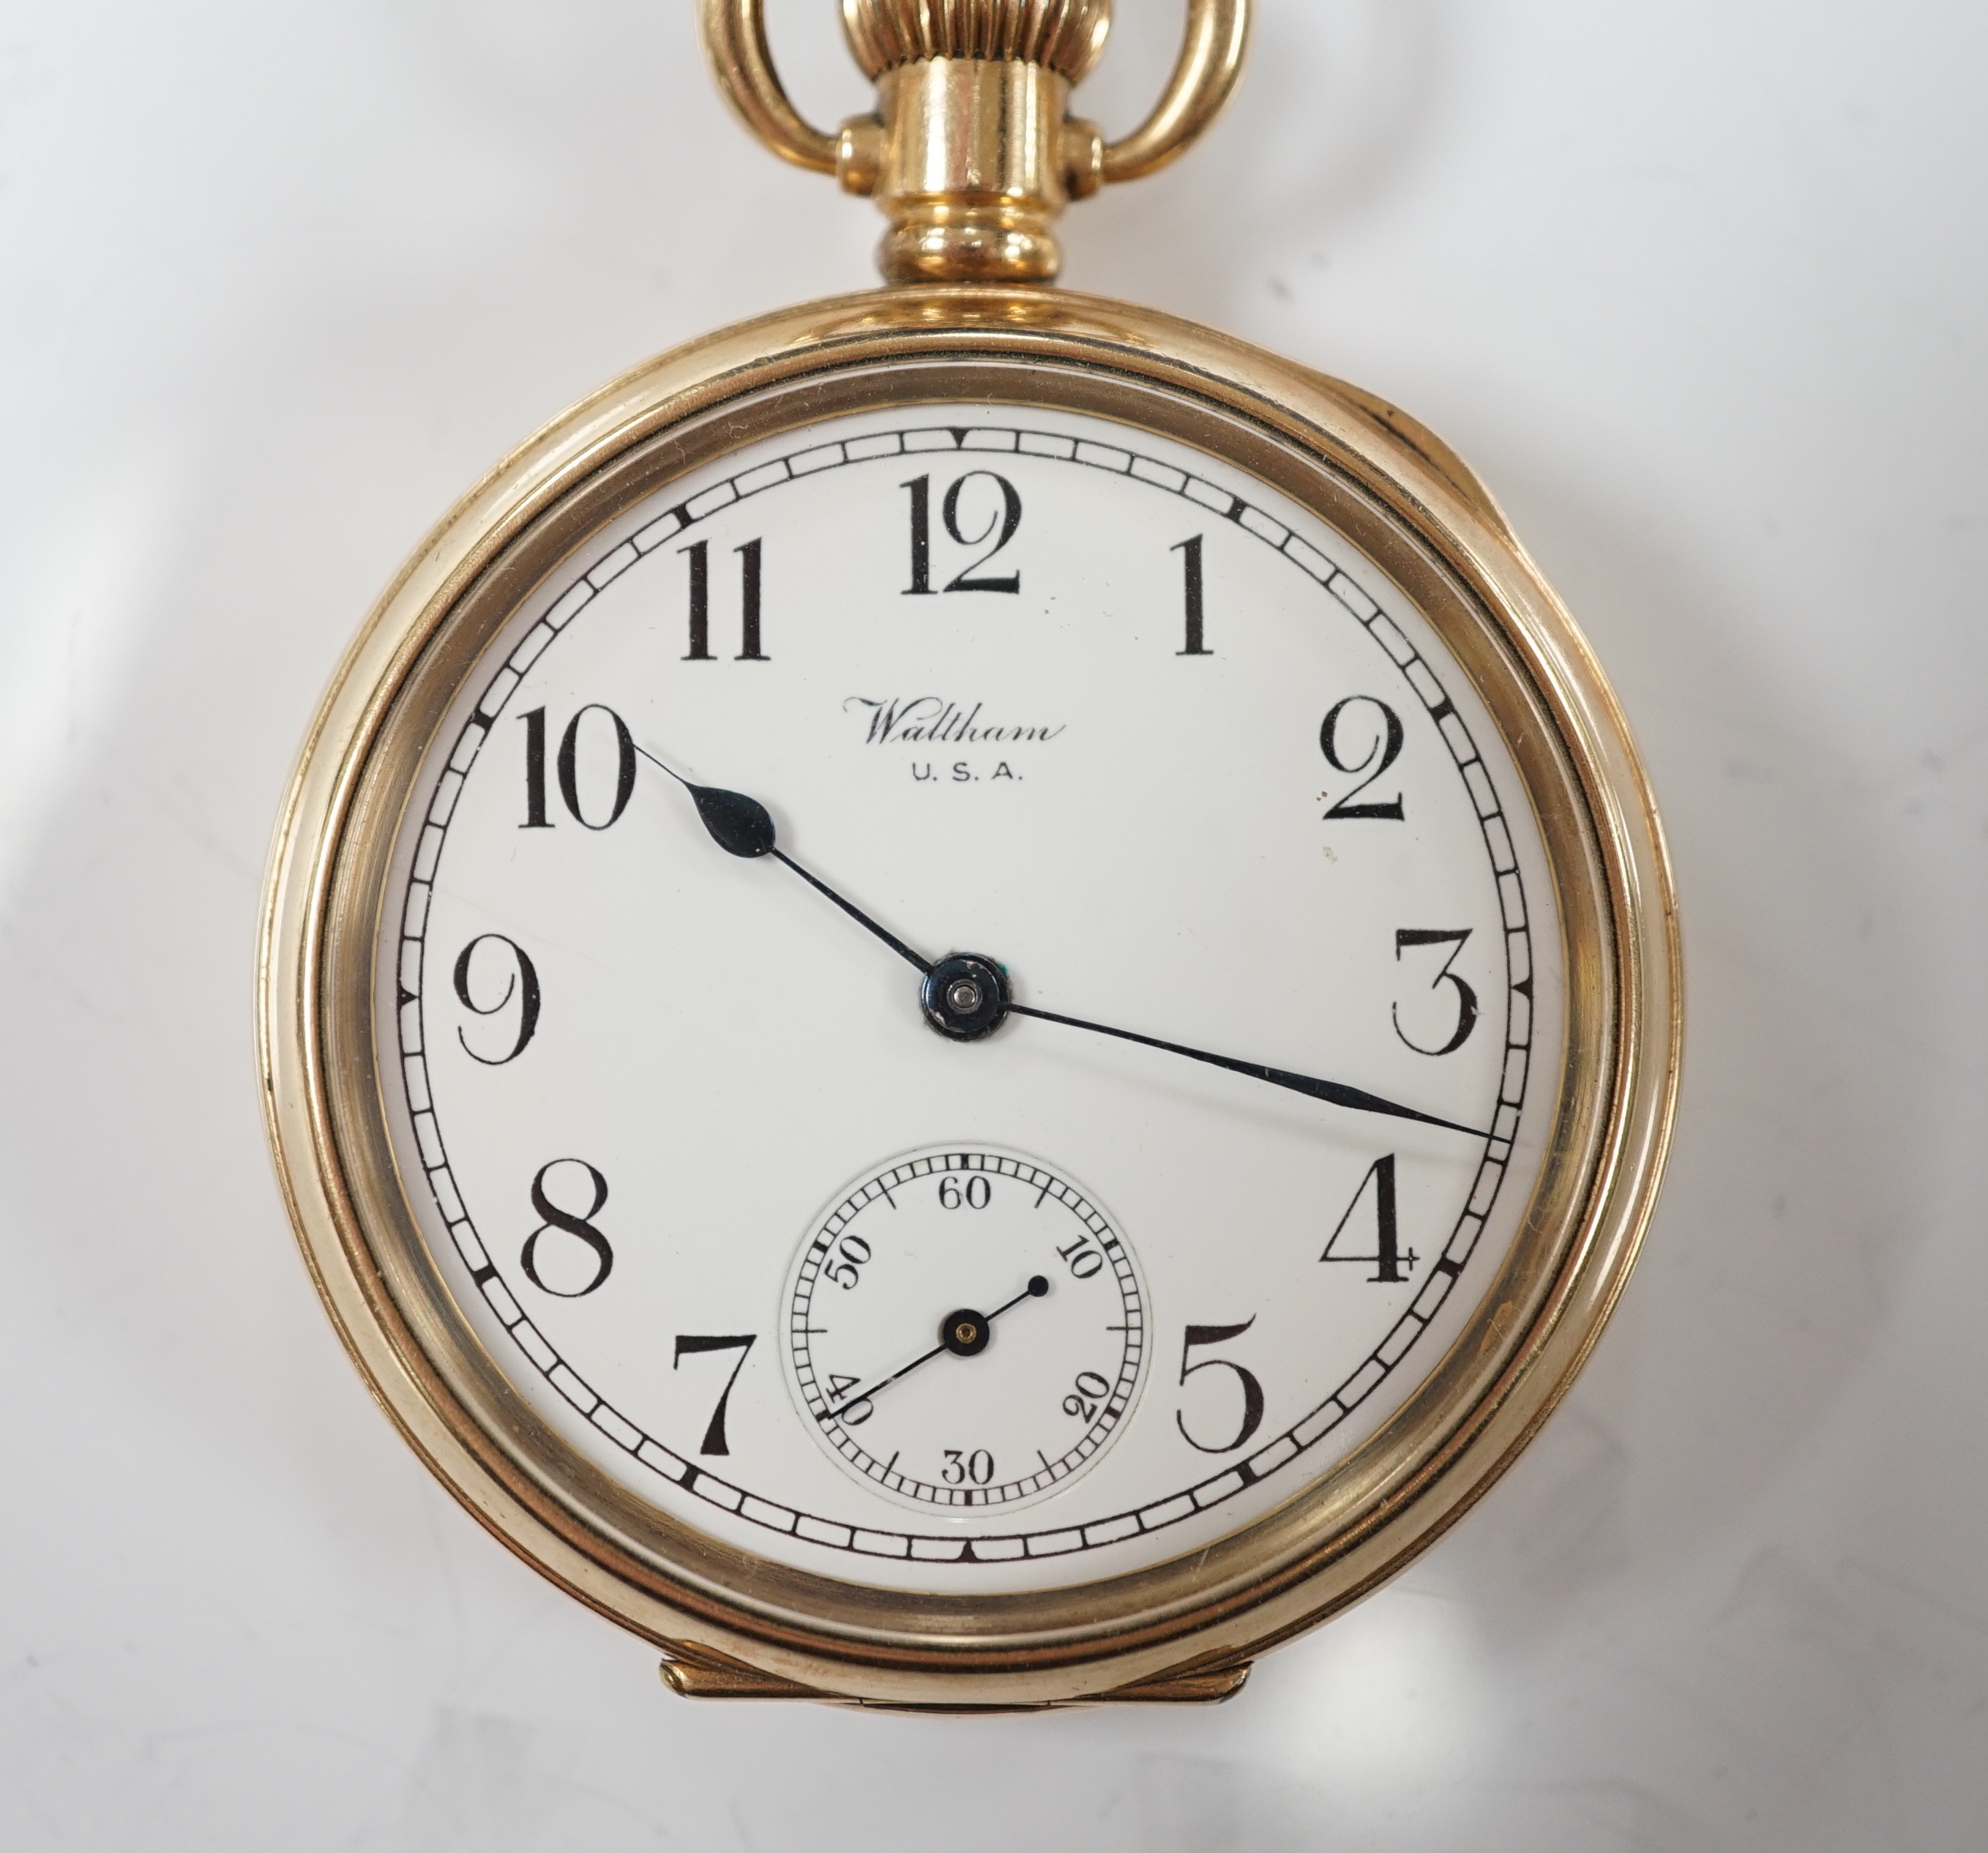 A Waltham gold plated open face keyless pocket watch, with Roman dial and subsidiary seconds.